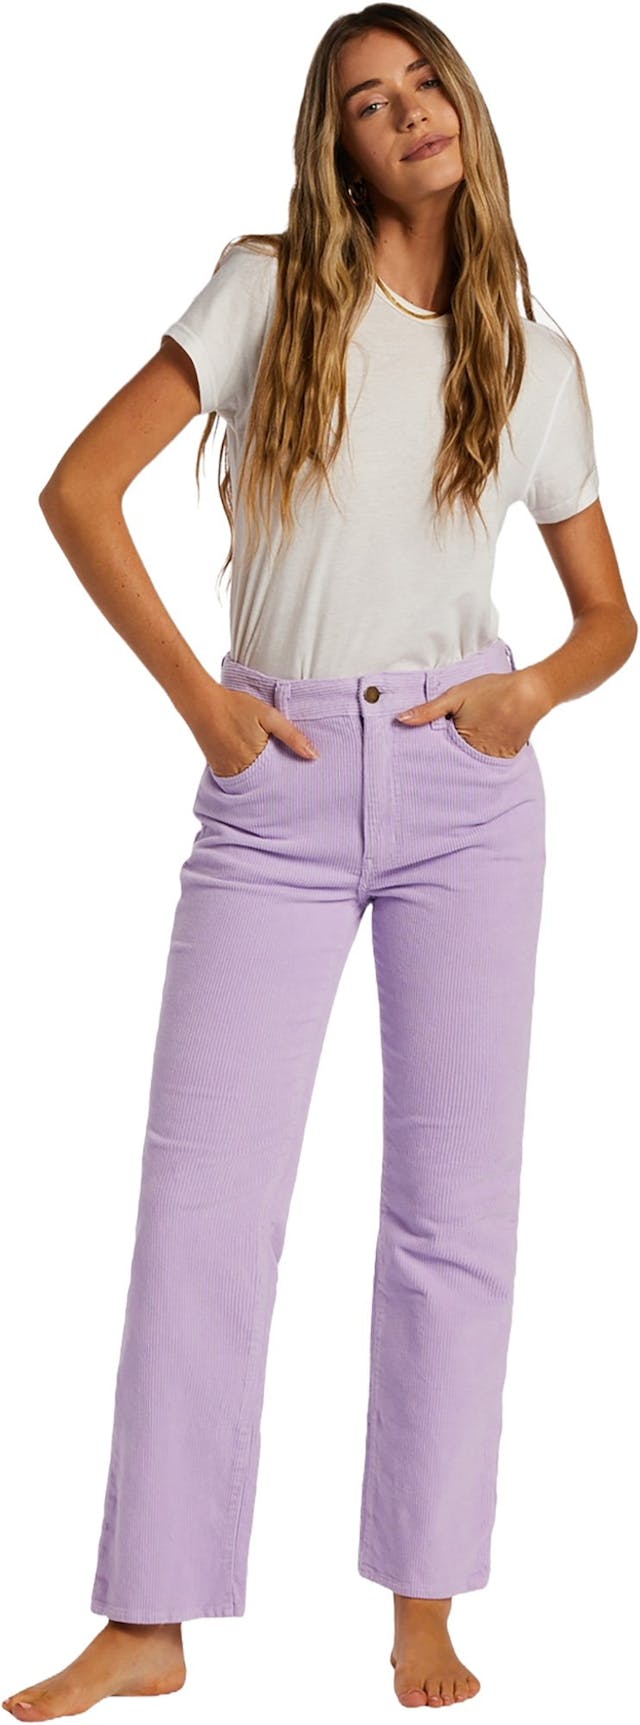 Product image for New Age Corduroy Trousers - Women's